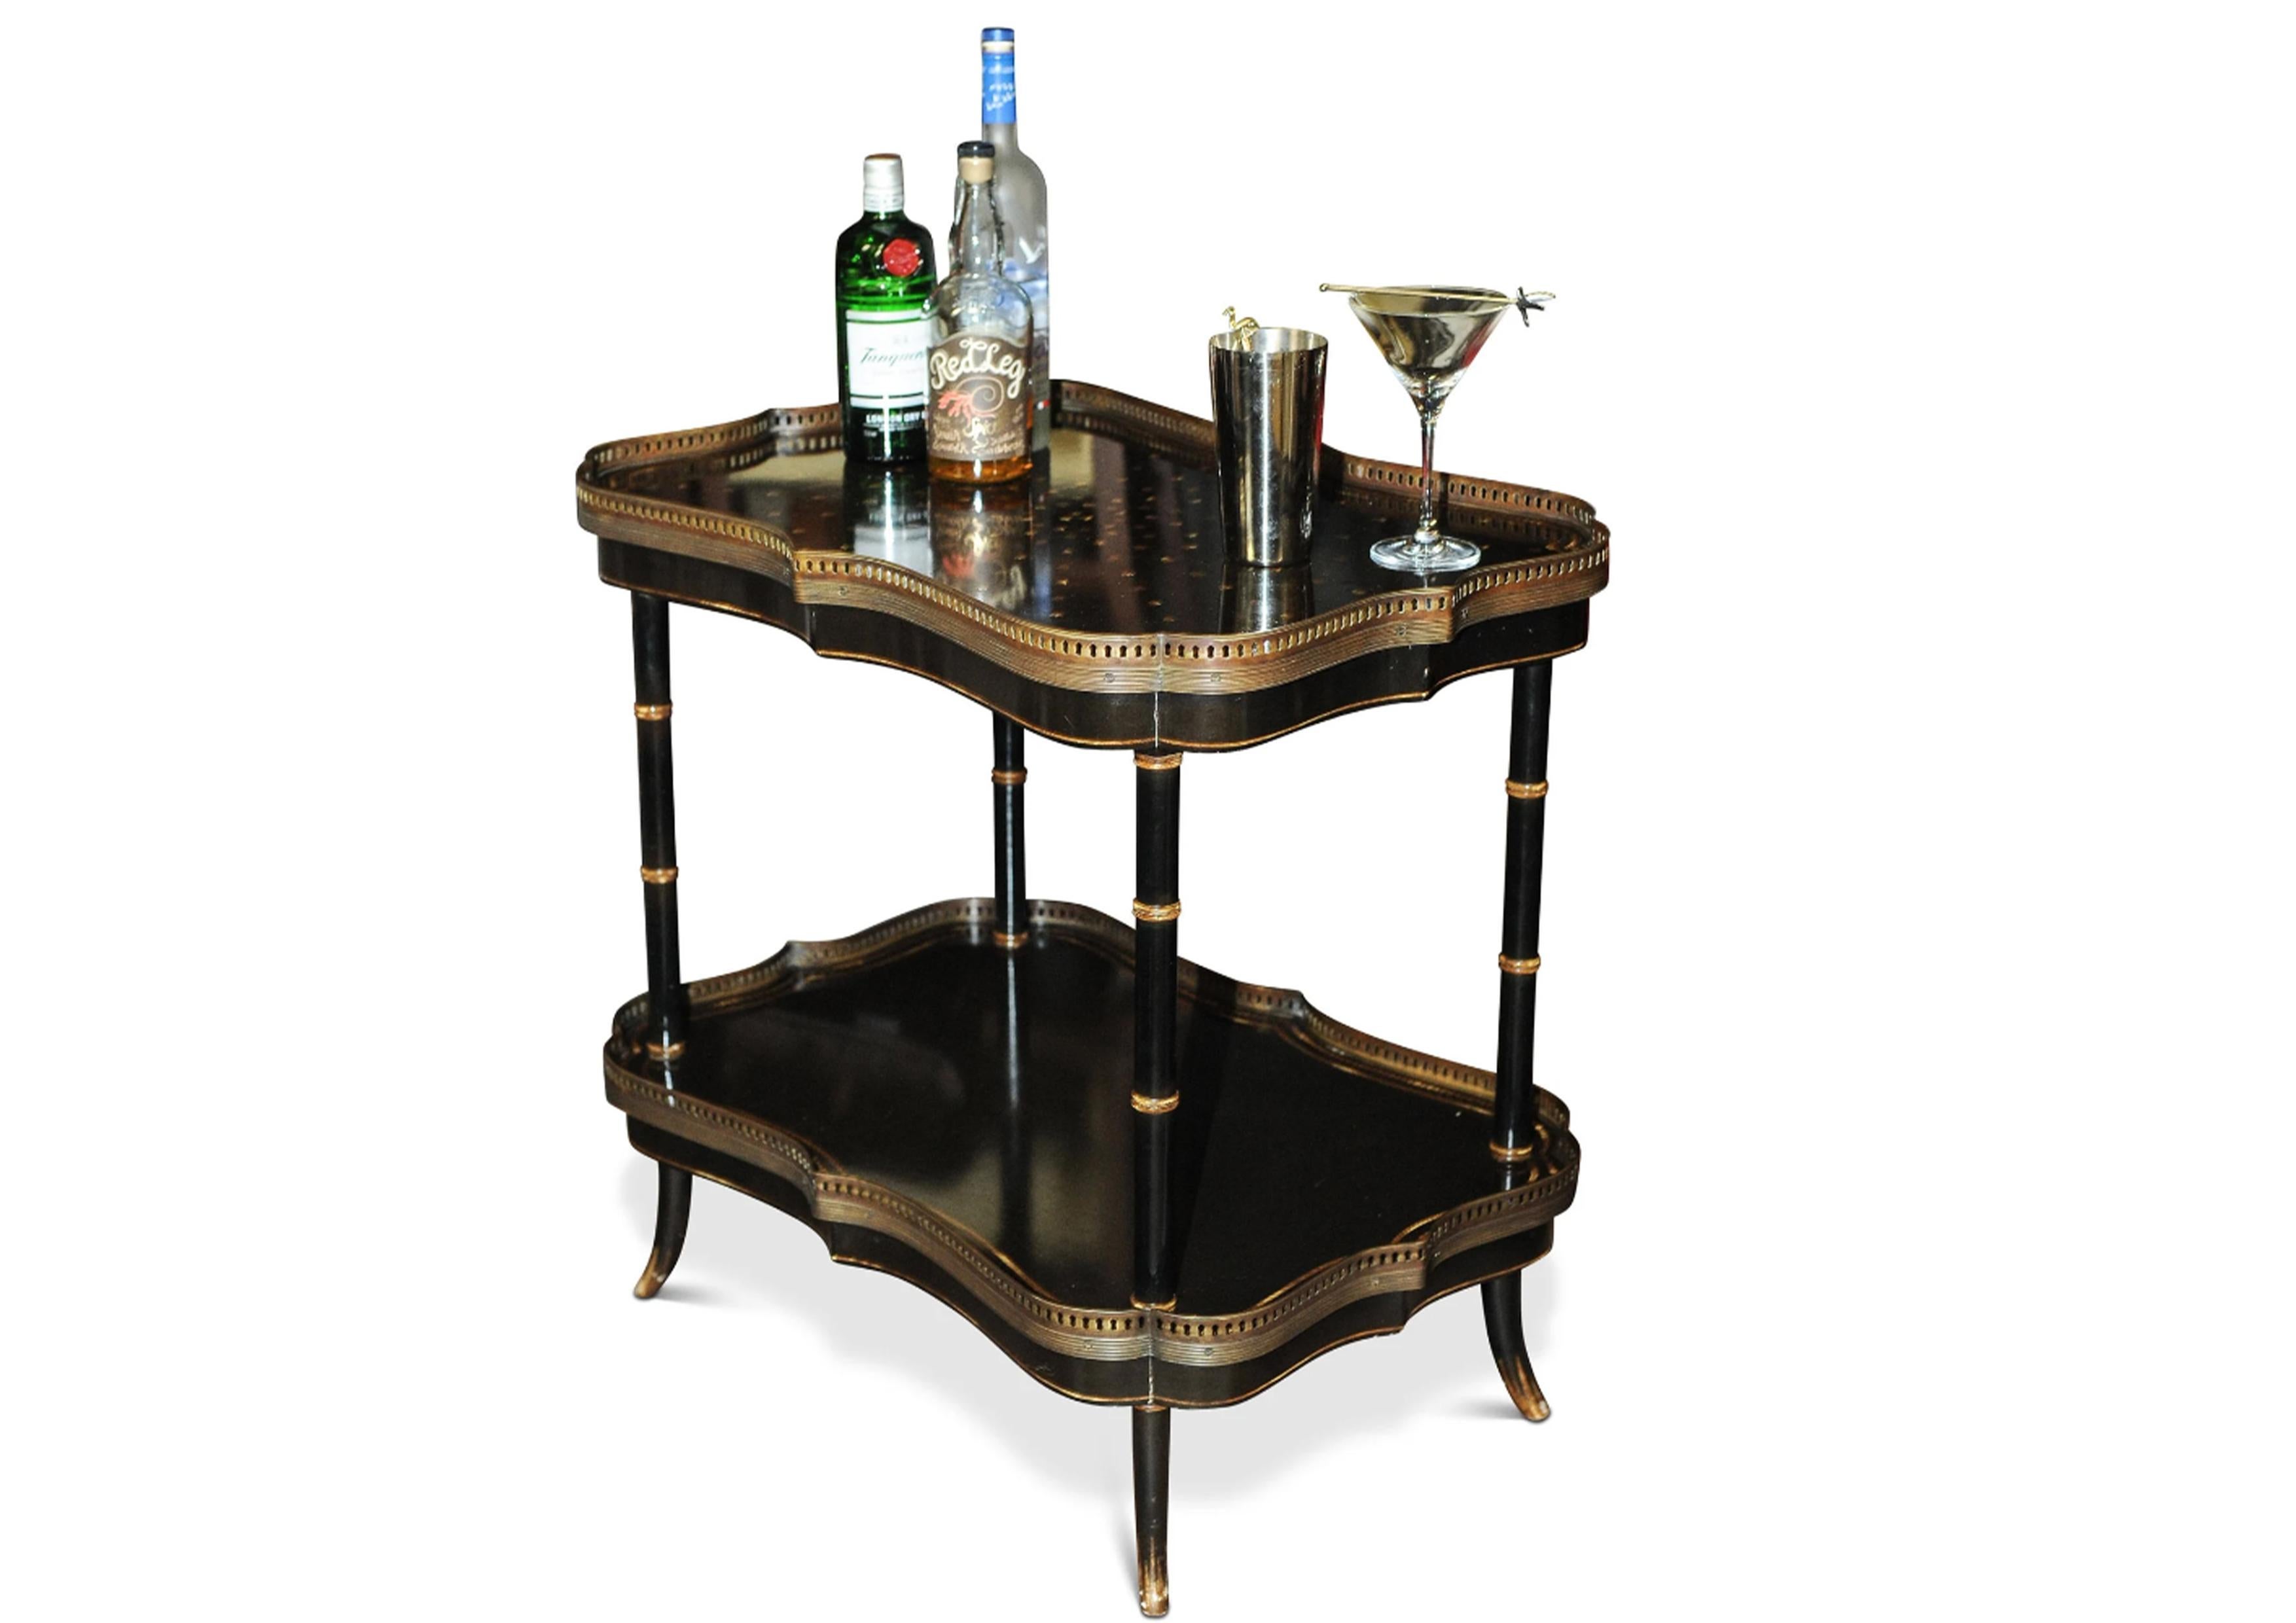 Regency Two Tier Painted Faux Bamboo Style Ebonized Étagére with Decorative Brass Edges